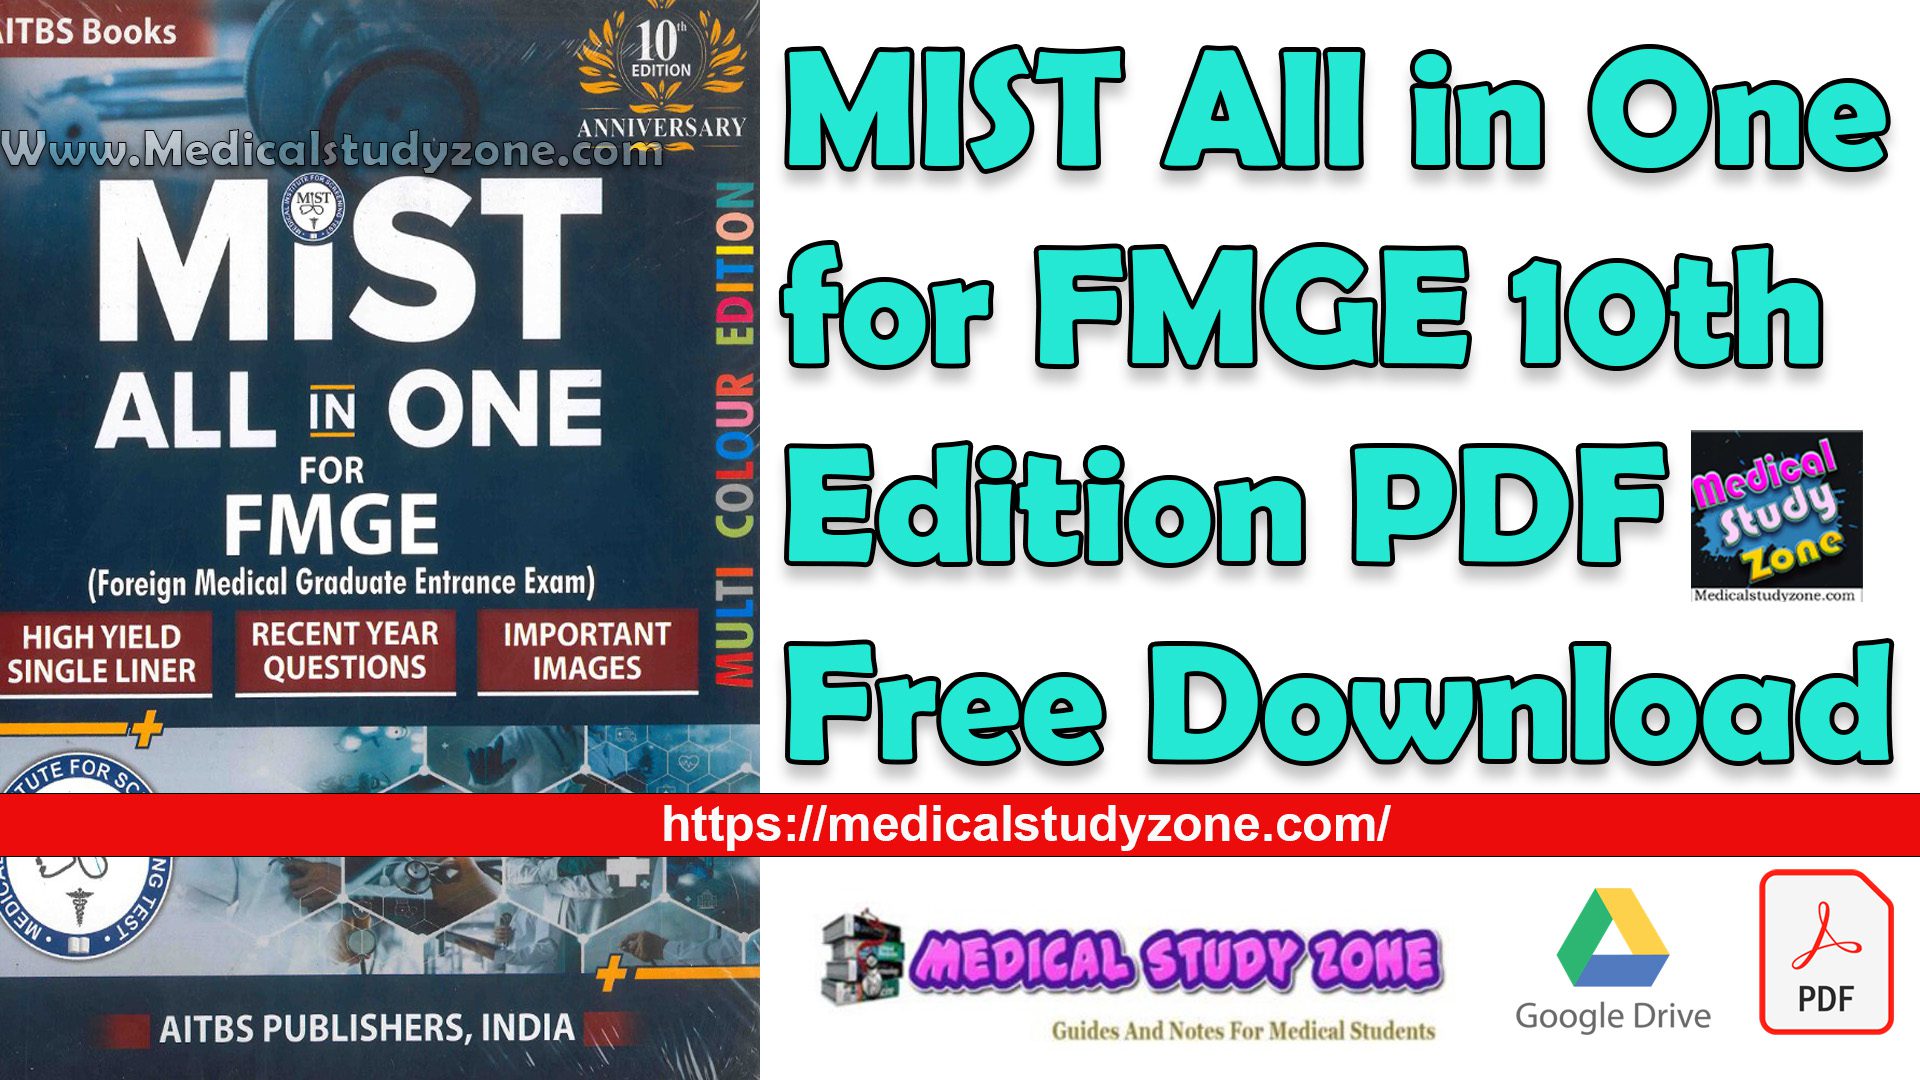 MIST All in One for FMGE 10th Edition PDF Free Download